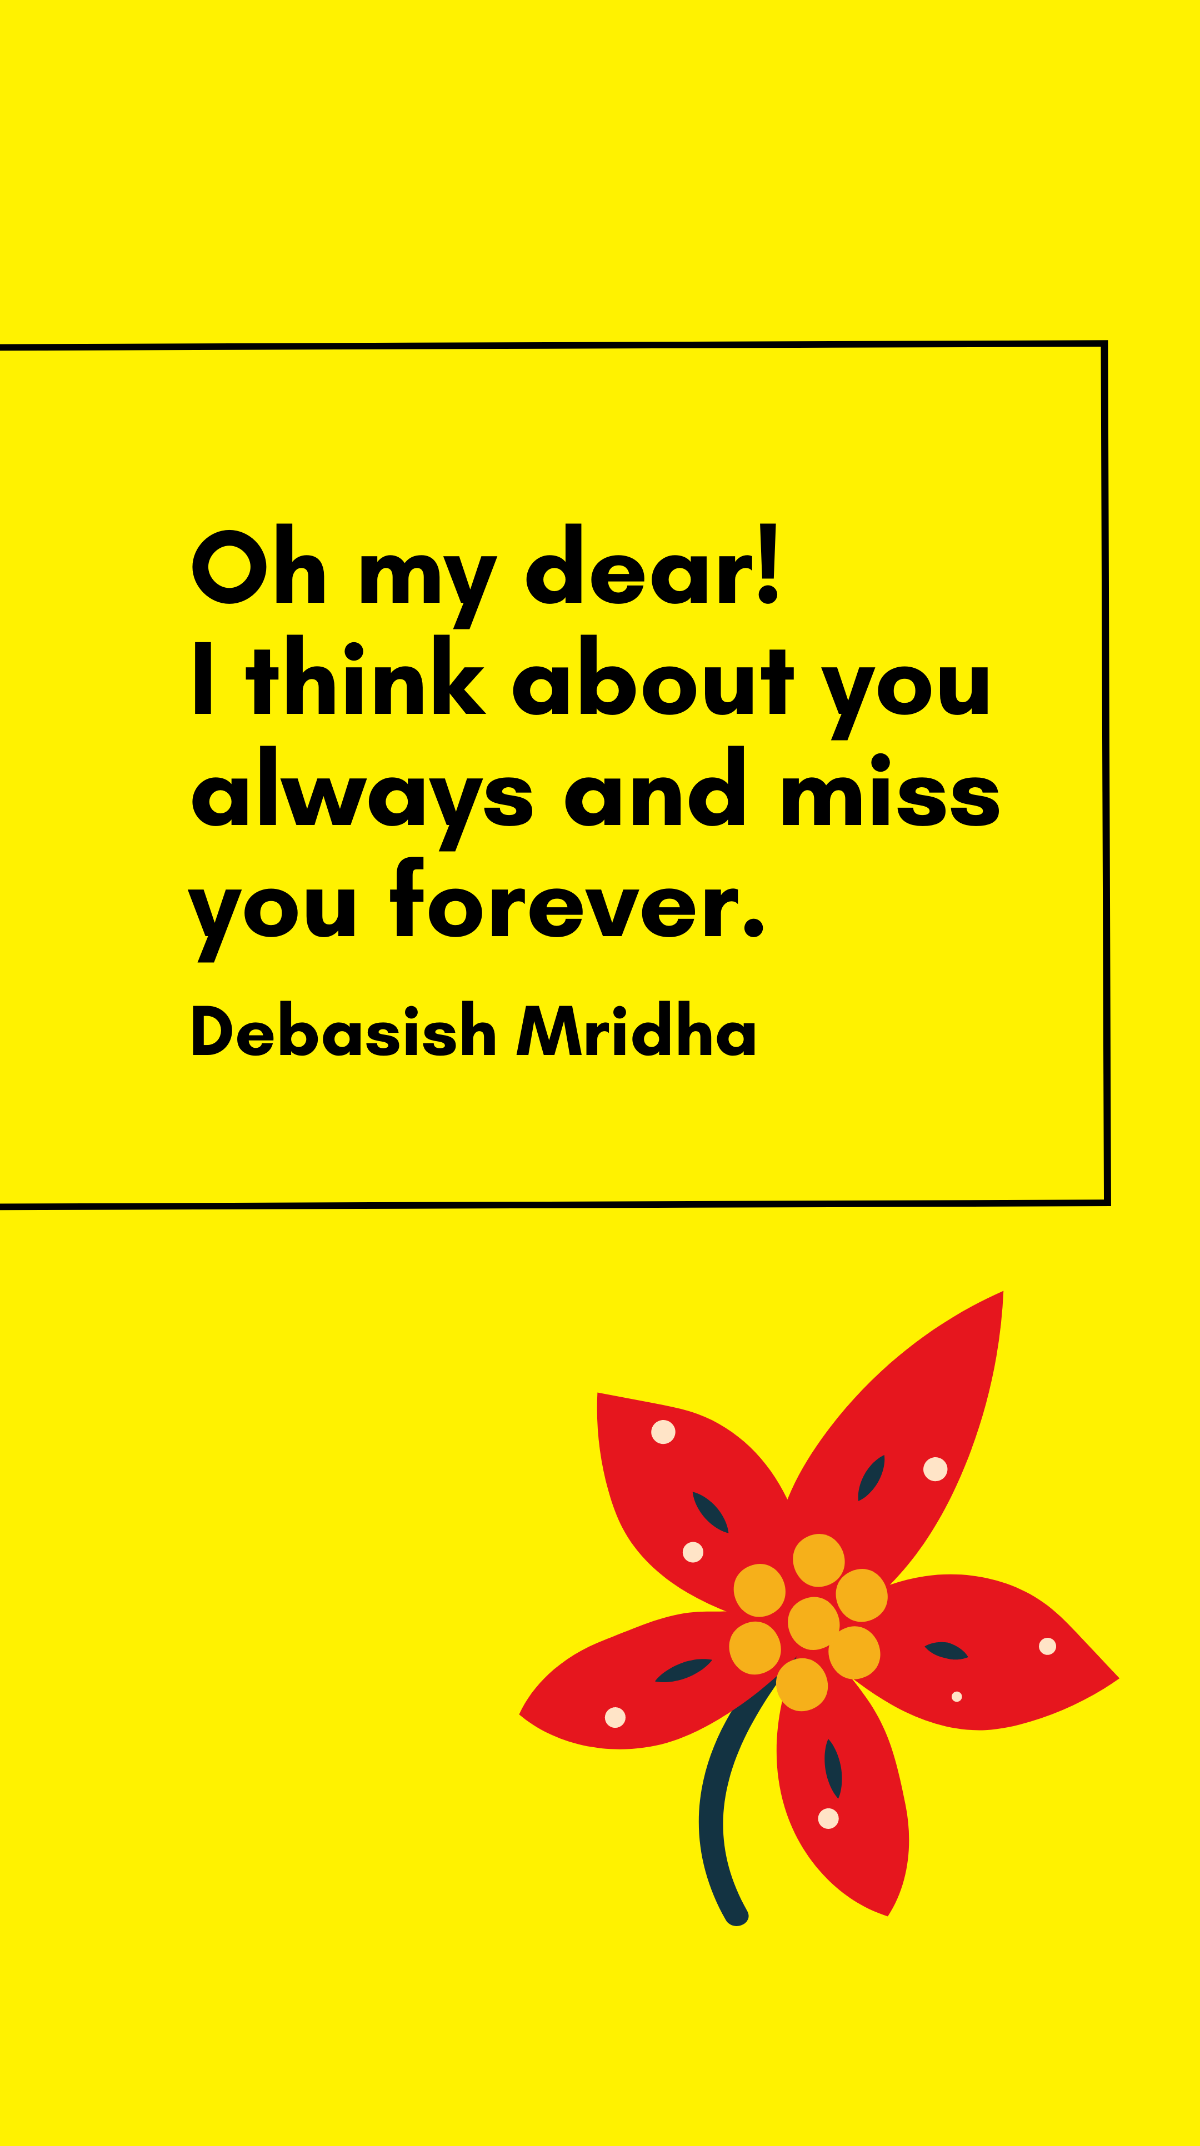 Debasish Mridha - Oh my dear! I think about you always and miss you forever.